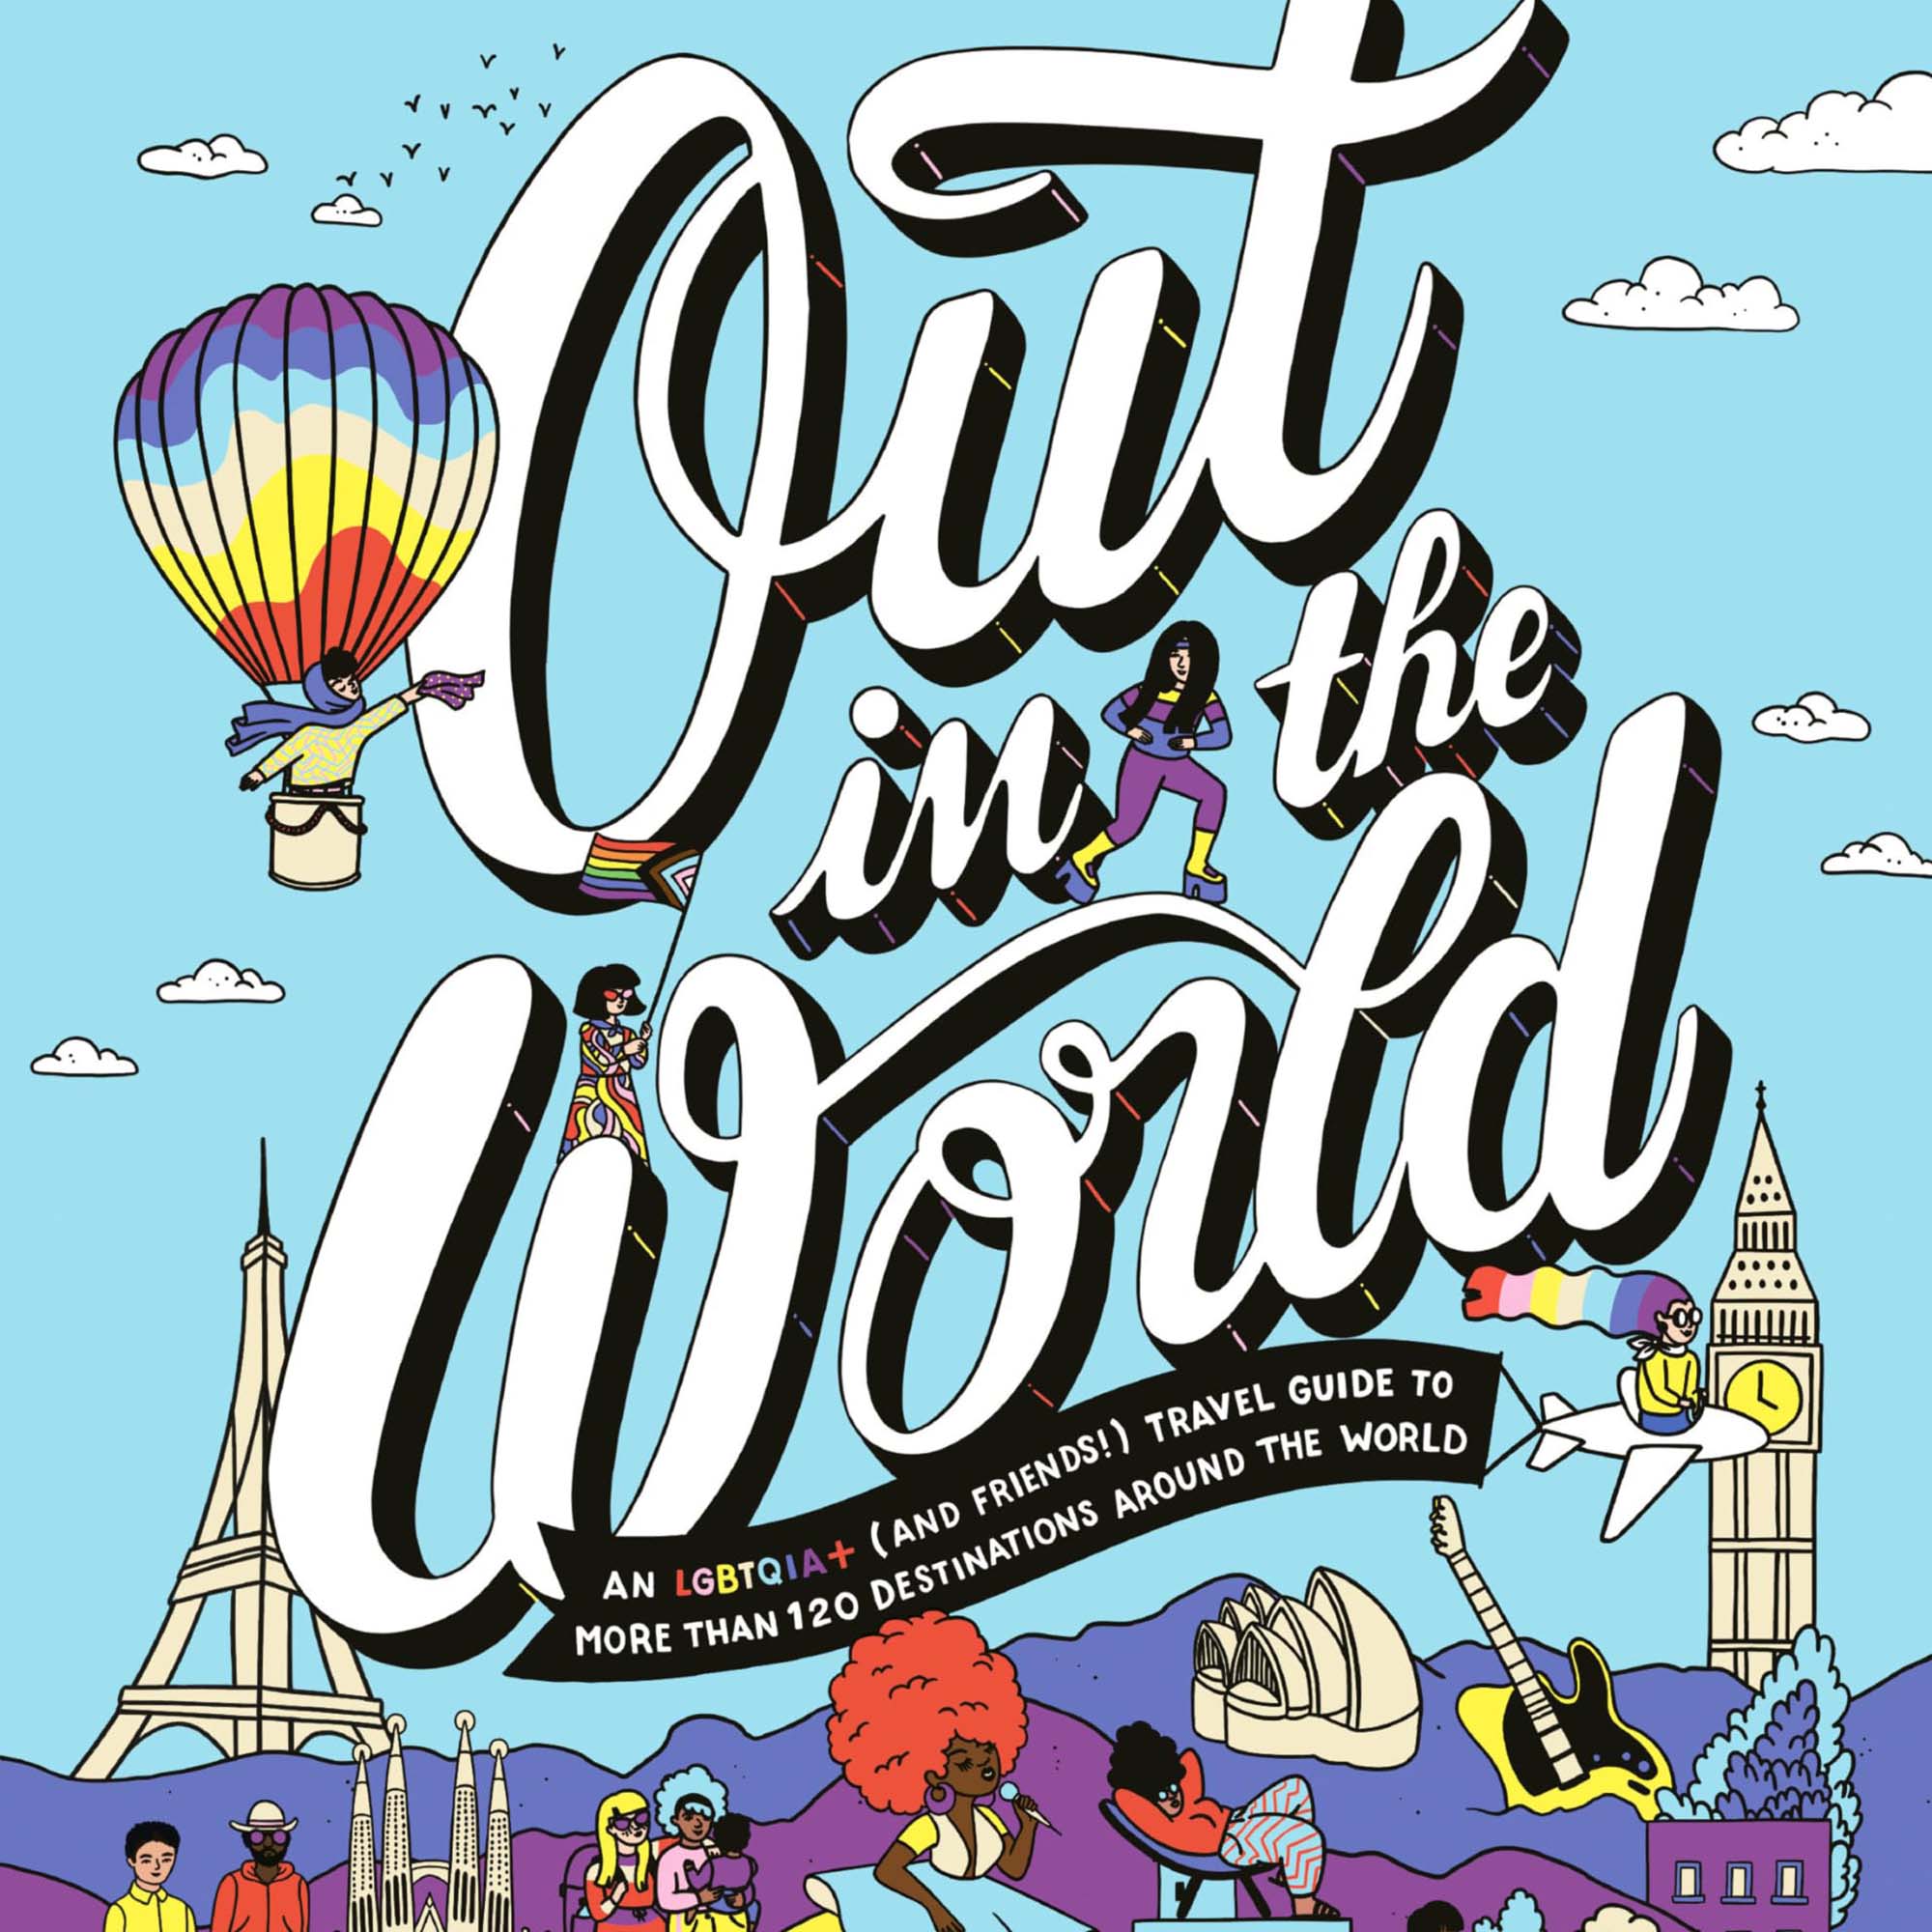 Photo: The cover of the book "Out in the World: An LGBTQIA+ (and Friends!) Travel Guide to More Than 100 Destinations Around the World" by Amy B. Scher and Mark Jason Williams. It features colorful illustrations of a diverse group of people enjoying different landmarks from around the world